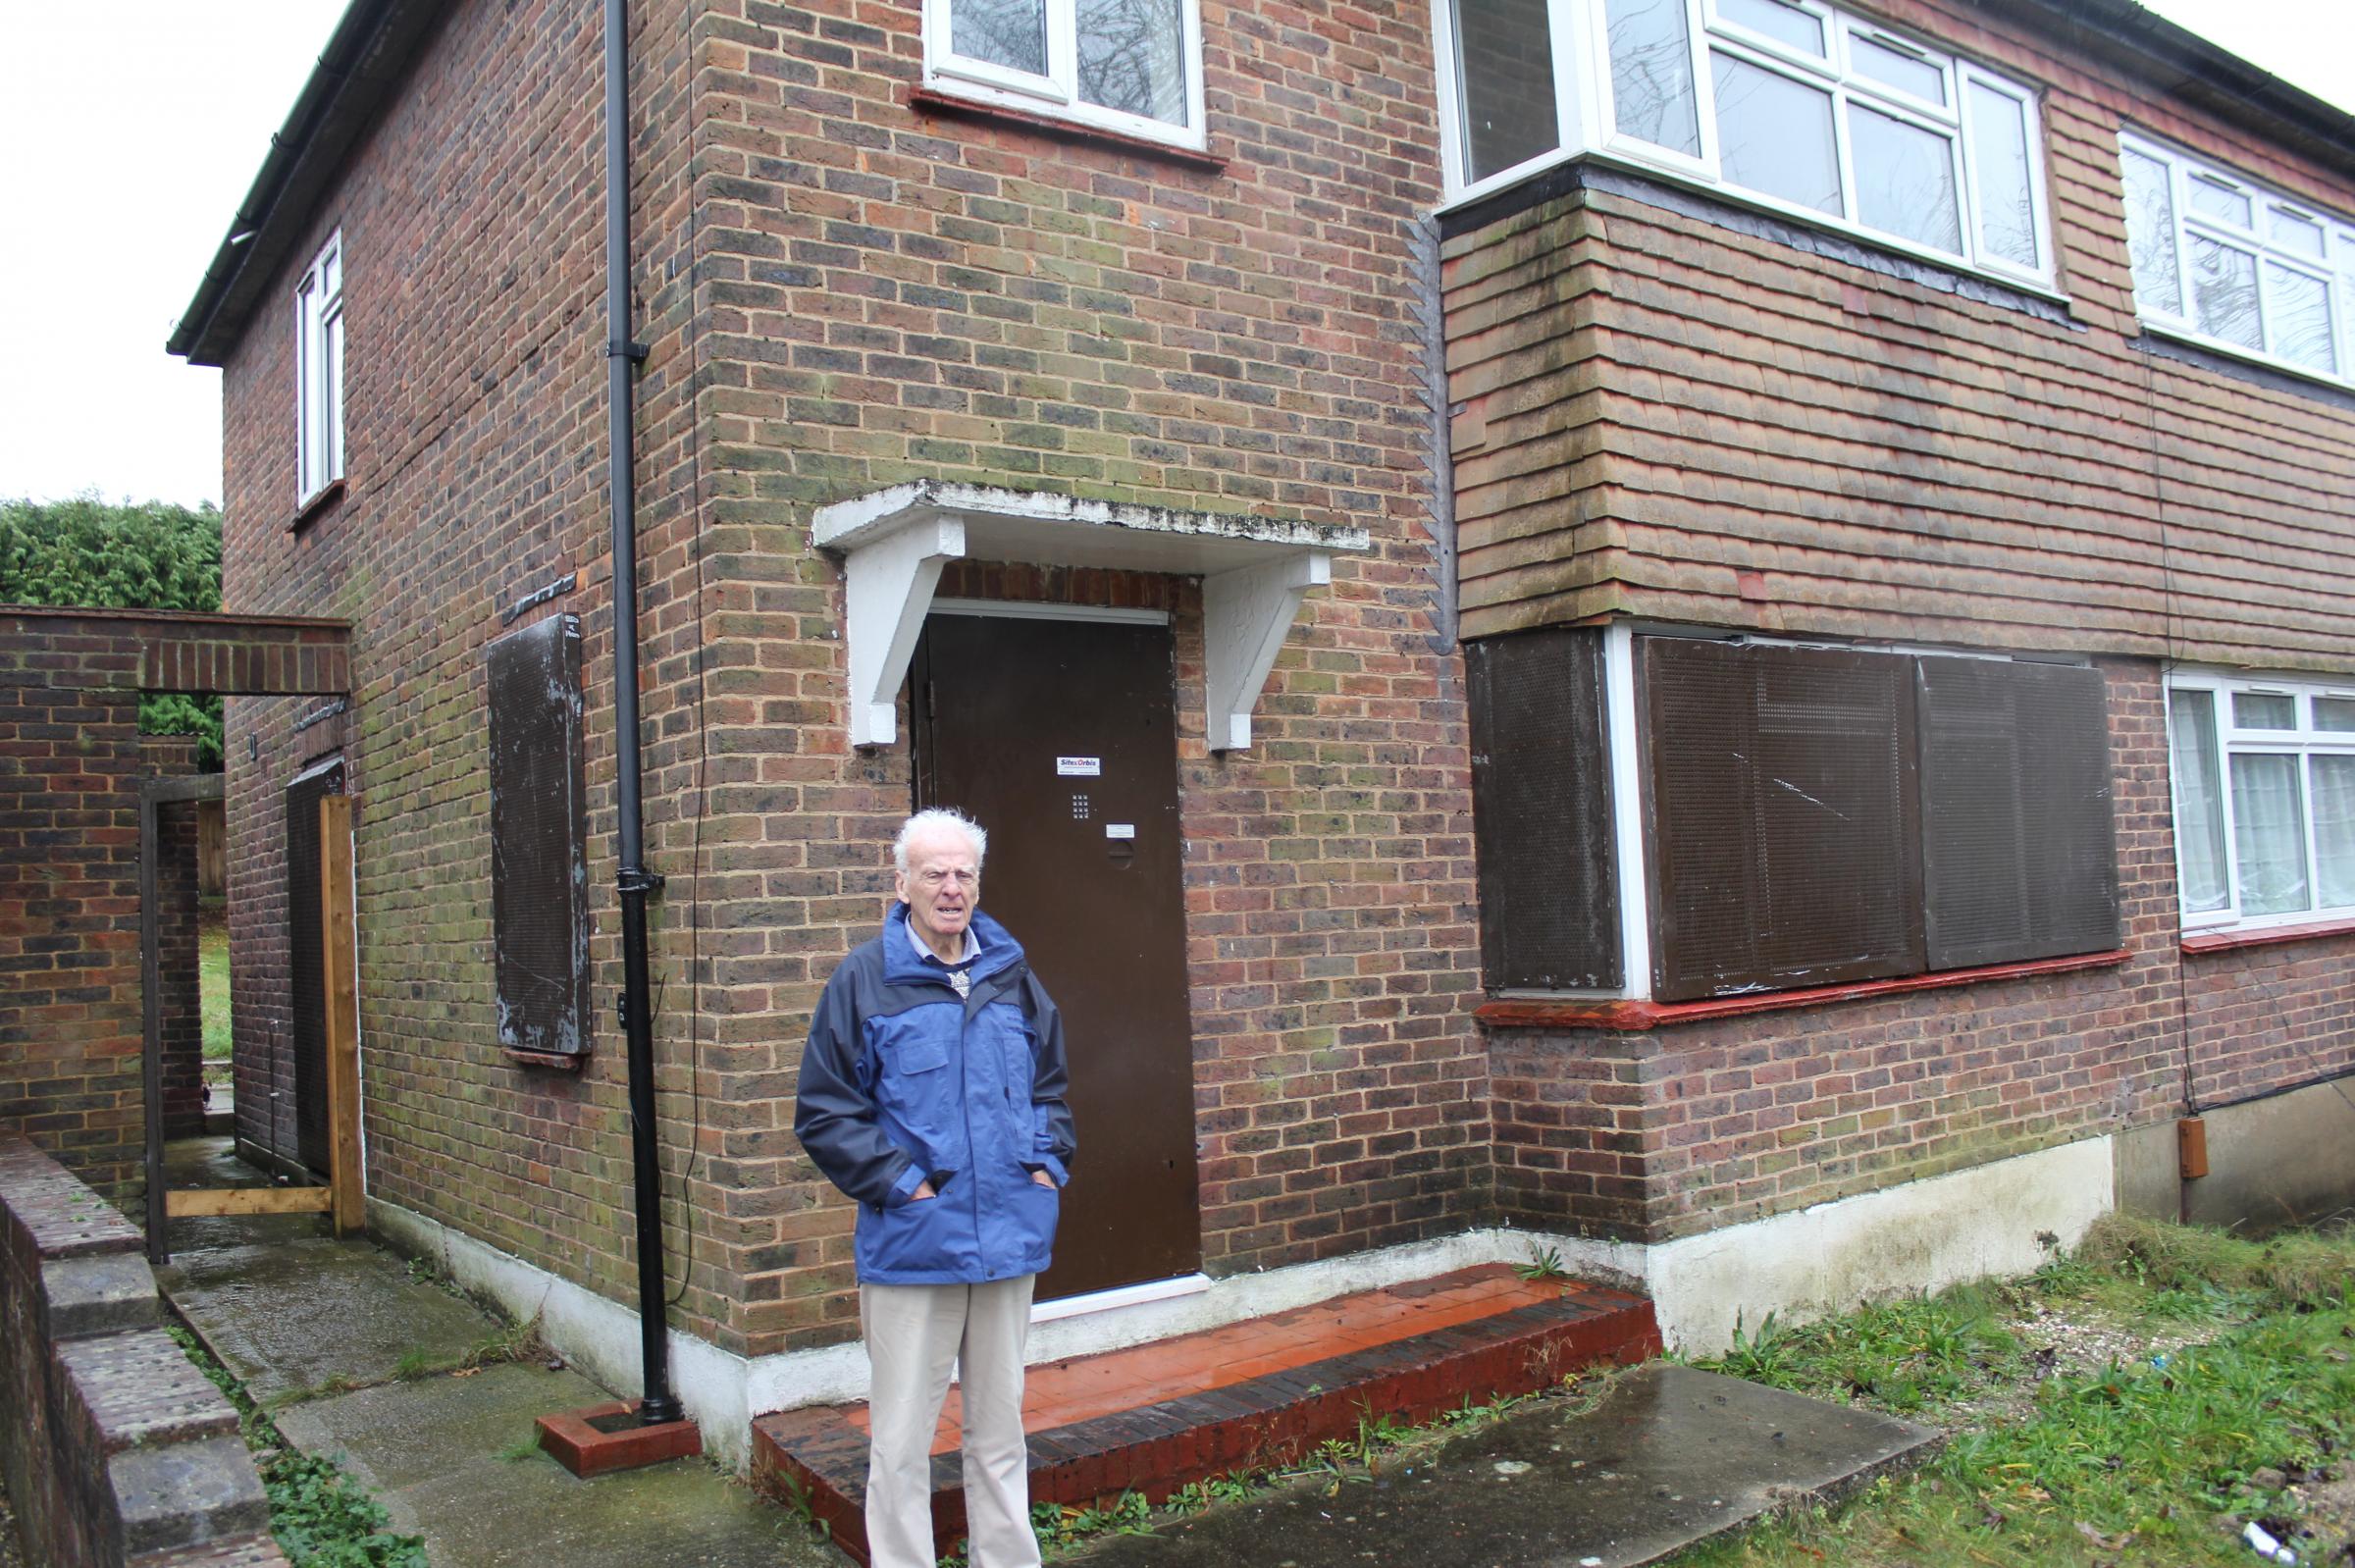 'I do not feel secure': Pensioner sick of living next to vacant 'eyesore' house in Chelsfield